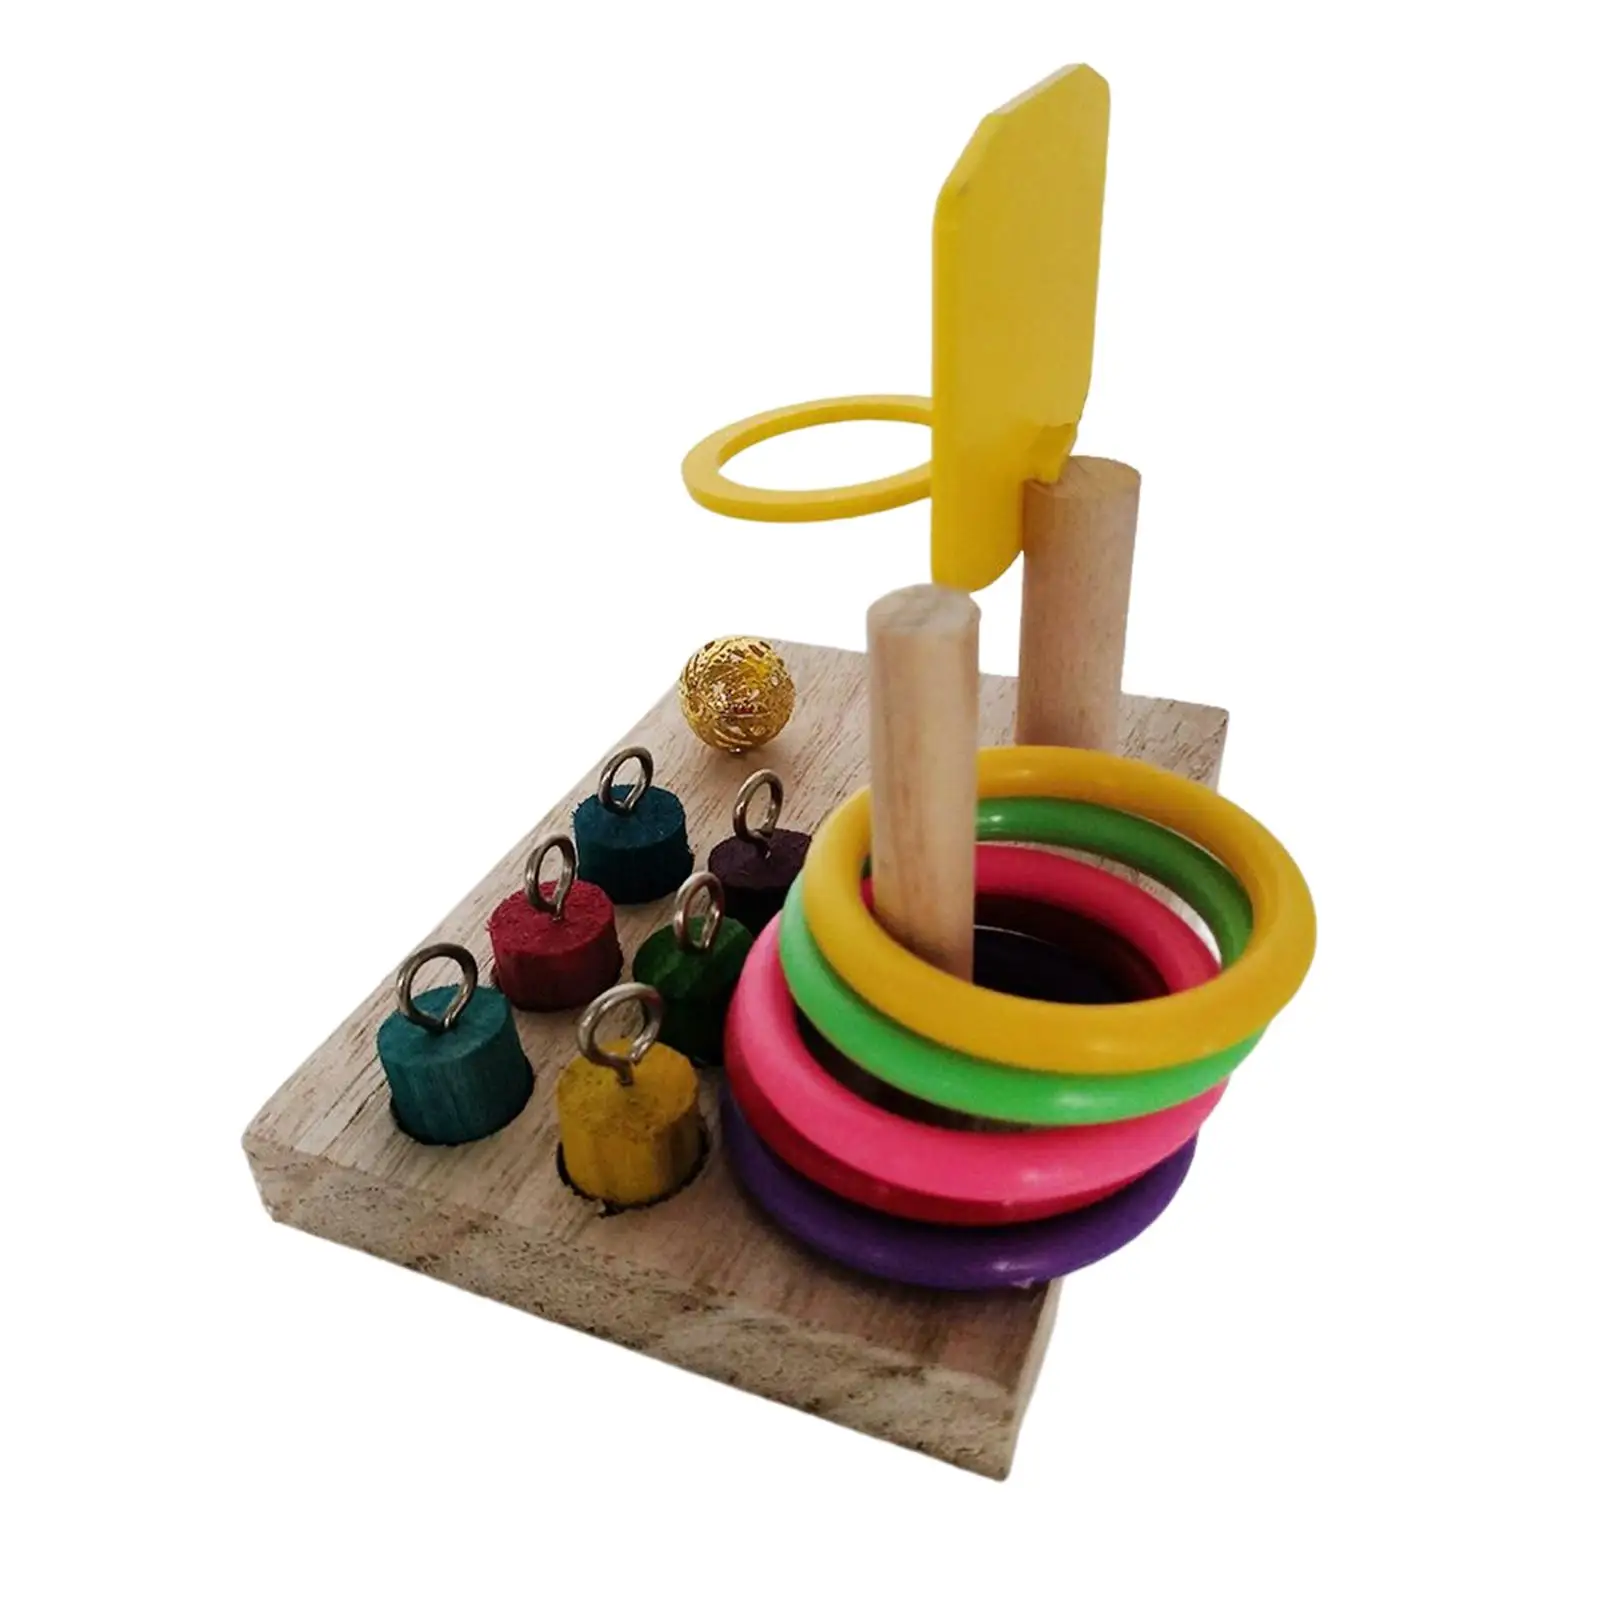 Wooden Parrot Intelligence Toy Bird Perch Stacking Rings Birds Chewing Toys for Macaws Finches Budgie Cockatiels Parrots